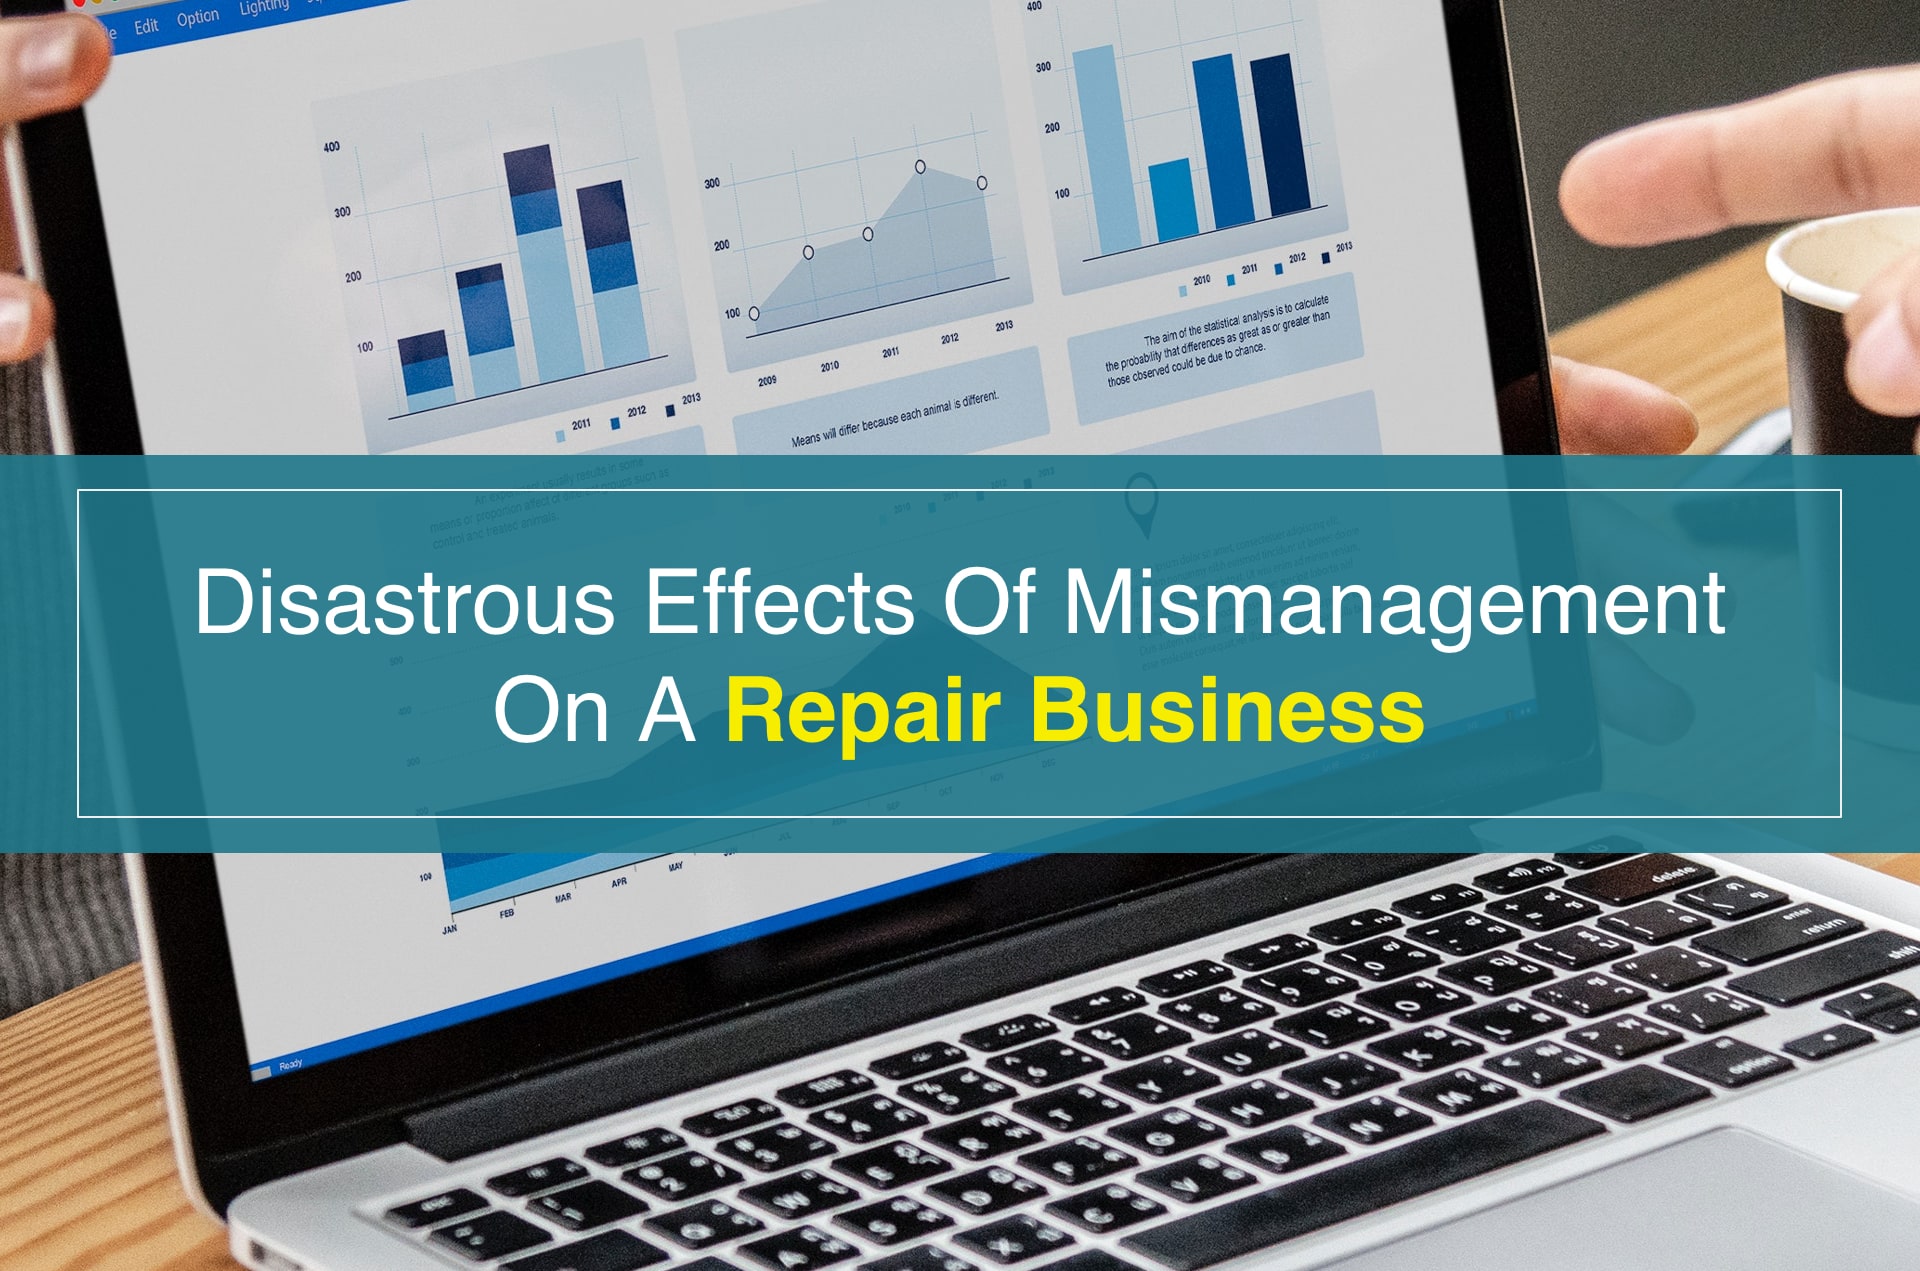 Effects of mismanagement on a repair business